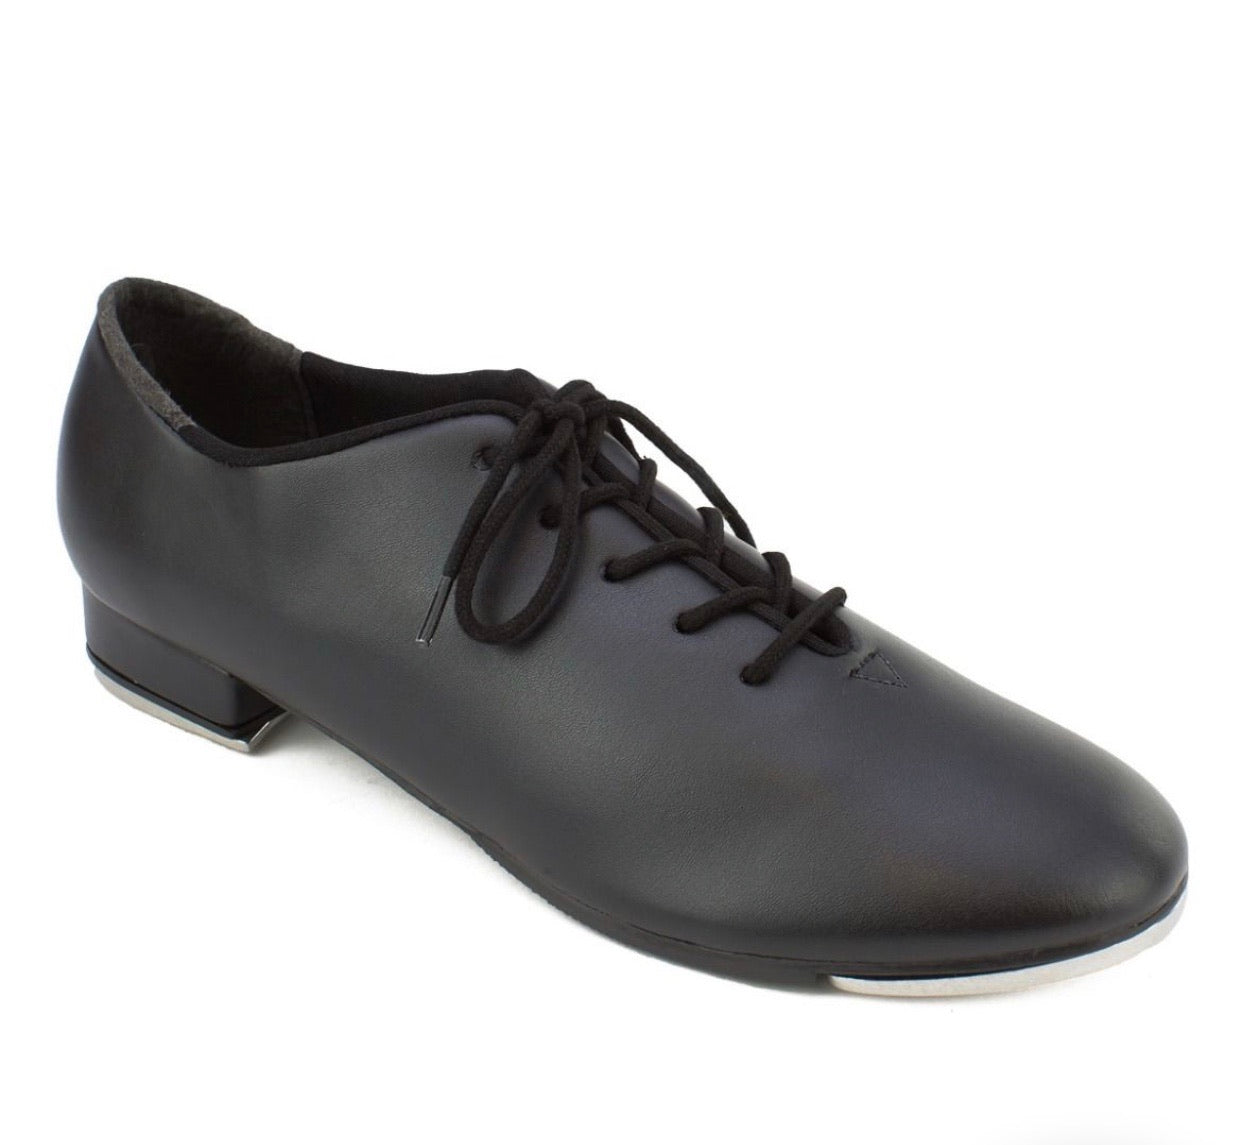 bloch oxford tap shoes